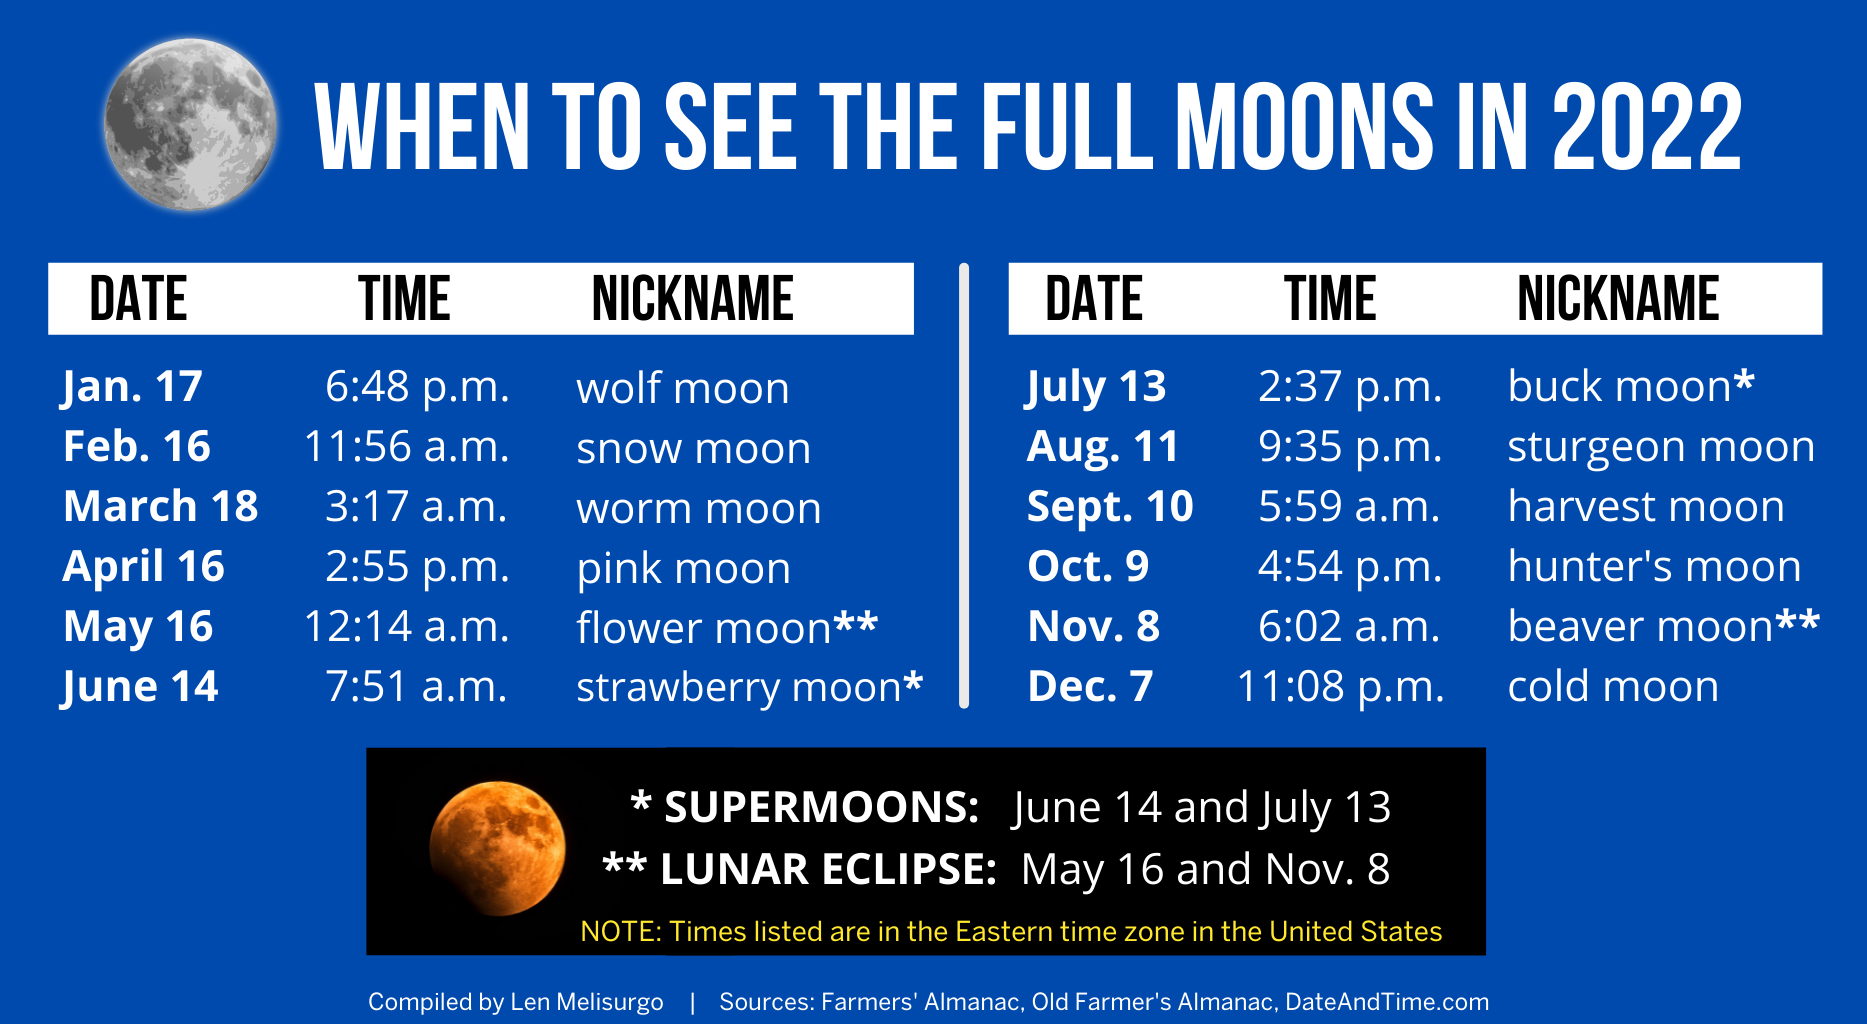 Full Moon Calendar 2022 Pacific Time The 12 Full Moons In 2022 Will Include 2 Supermoons, 2 Lunar Eclipses -  Nj.com